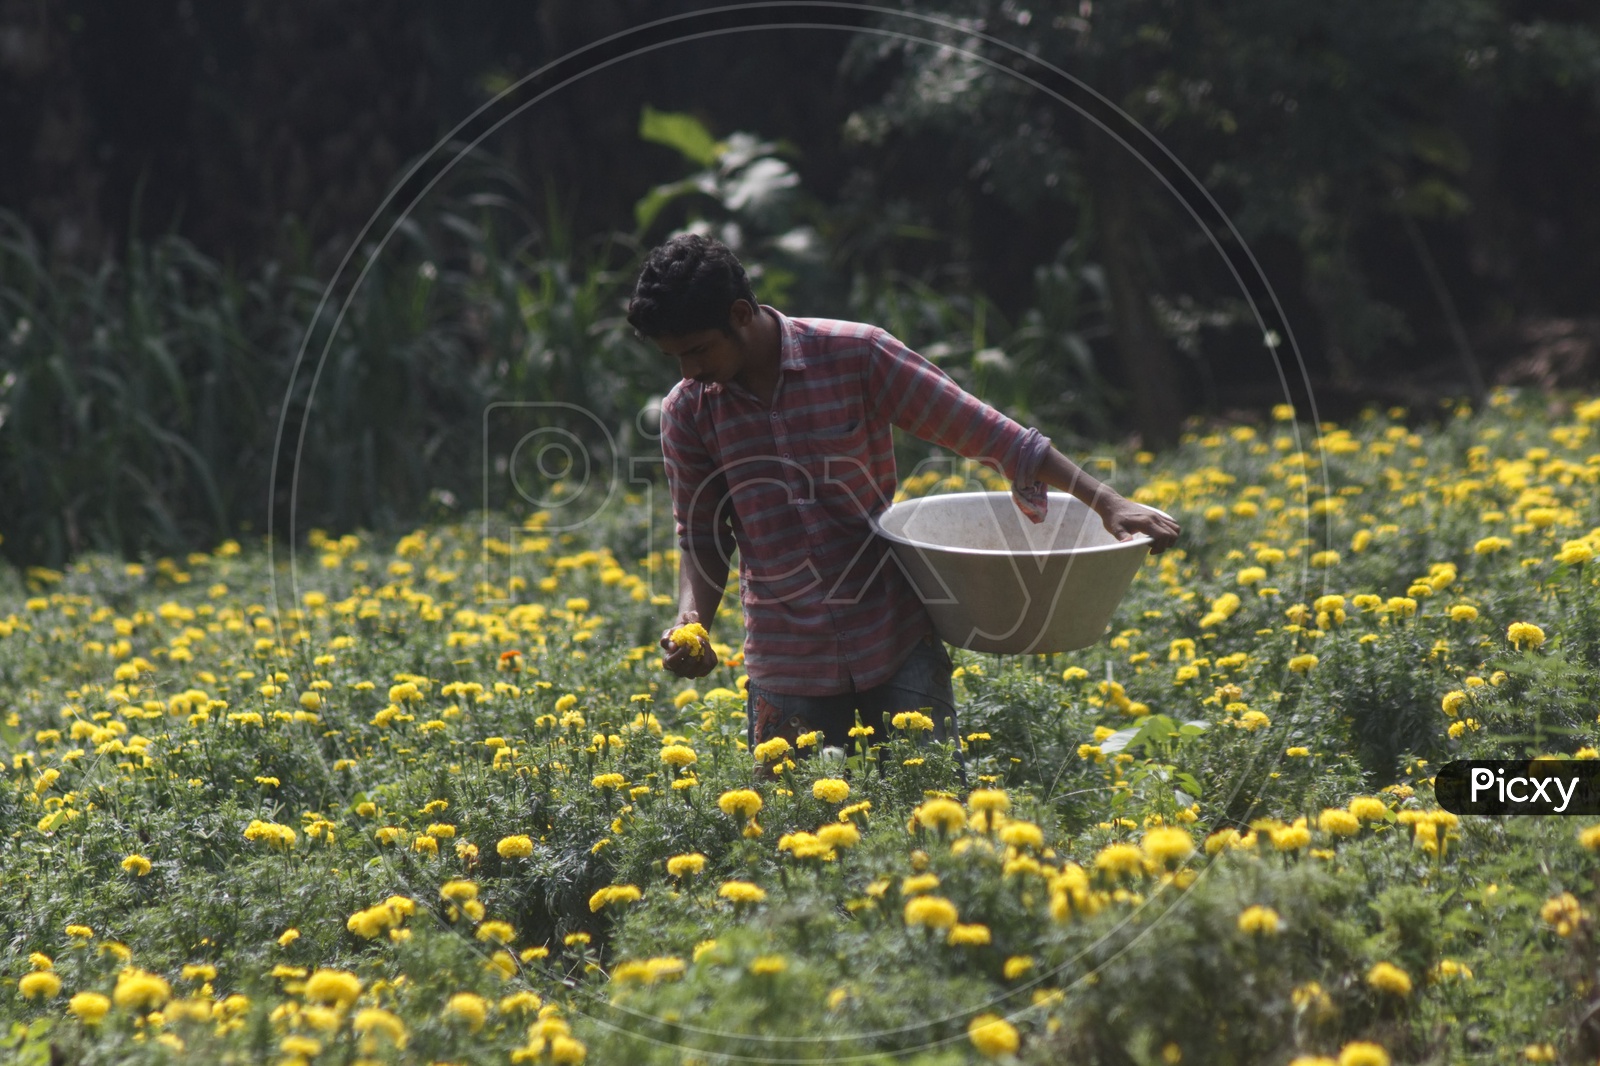 A man picking marigold sunflowers from a flower farm.